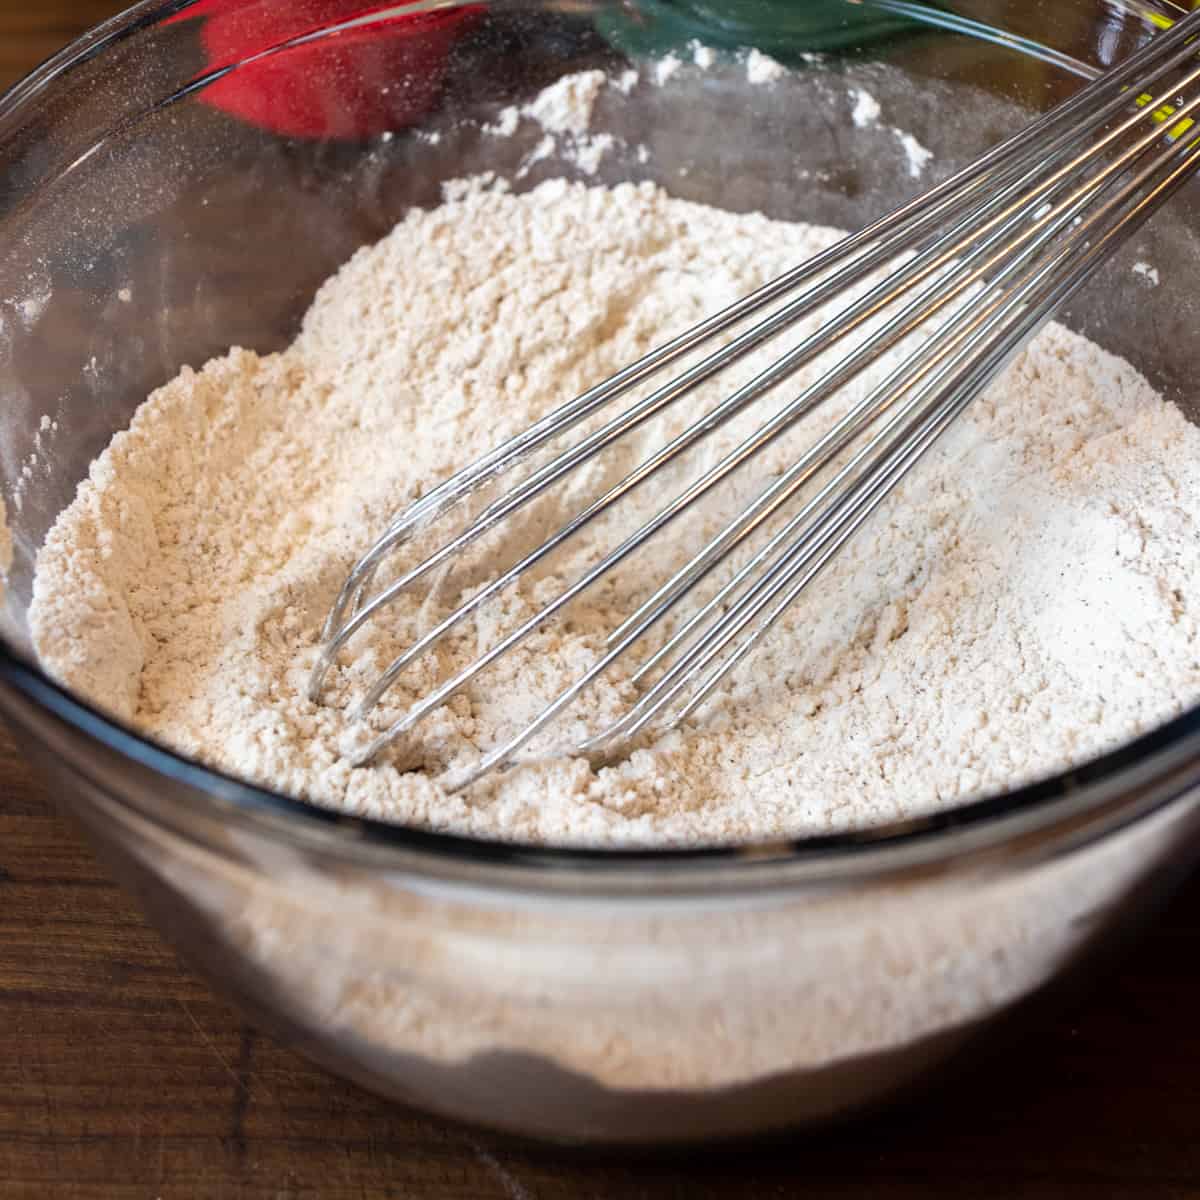 Dry ingredients sifted together in a glass bowl.